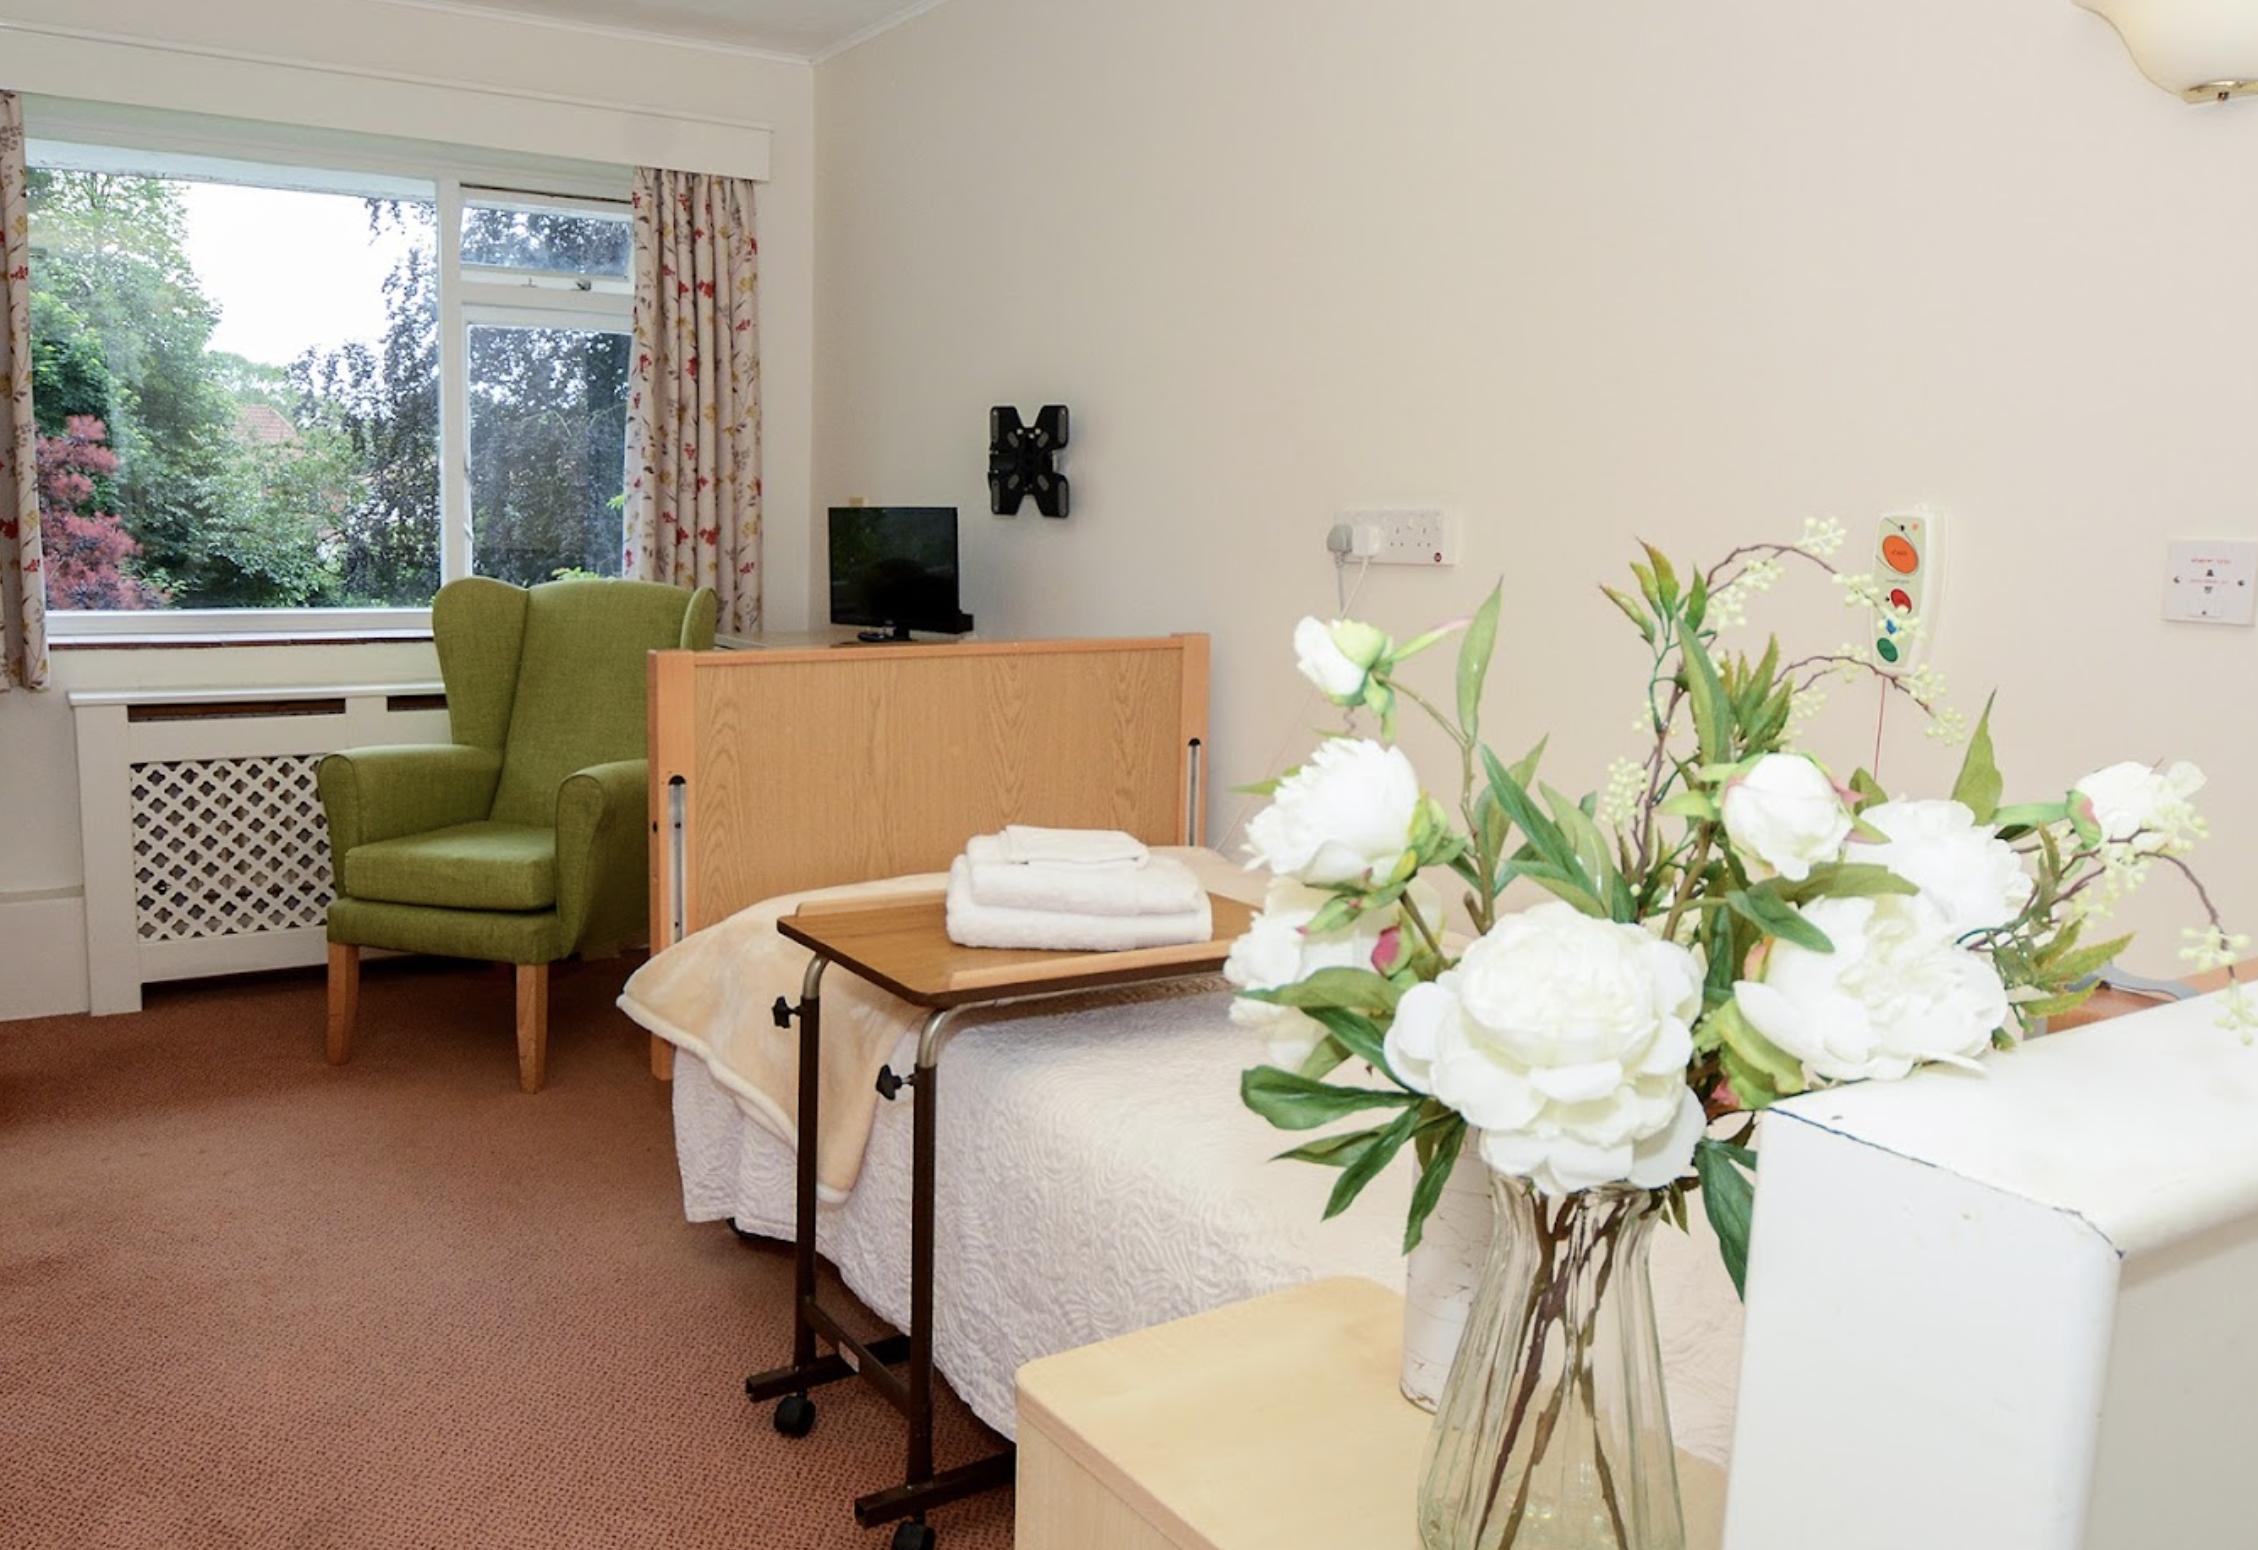 Bedroom of Dorset House care home in Poole, Hampshire